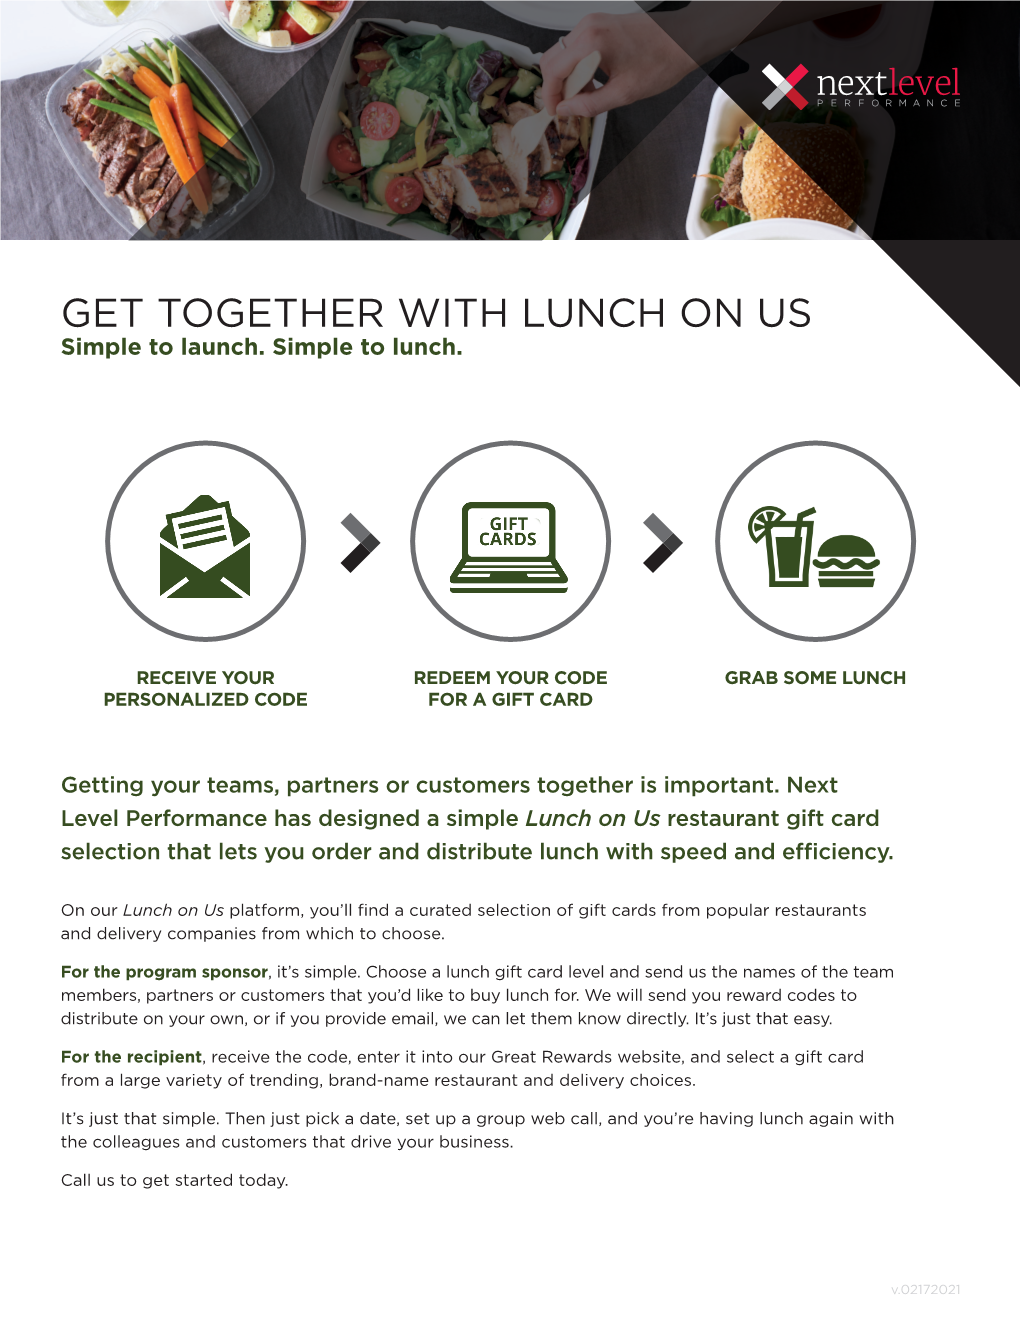 GET TOGETHER with LUNCH on US Simple to Launch